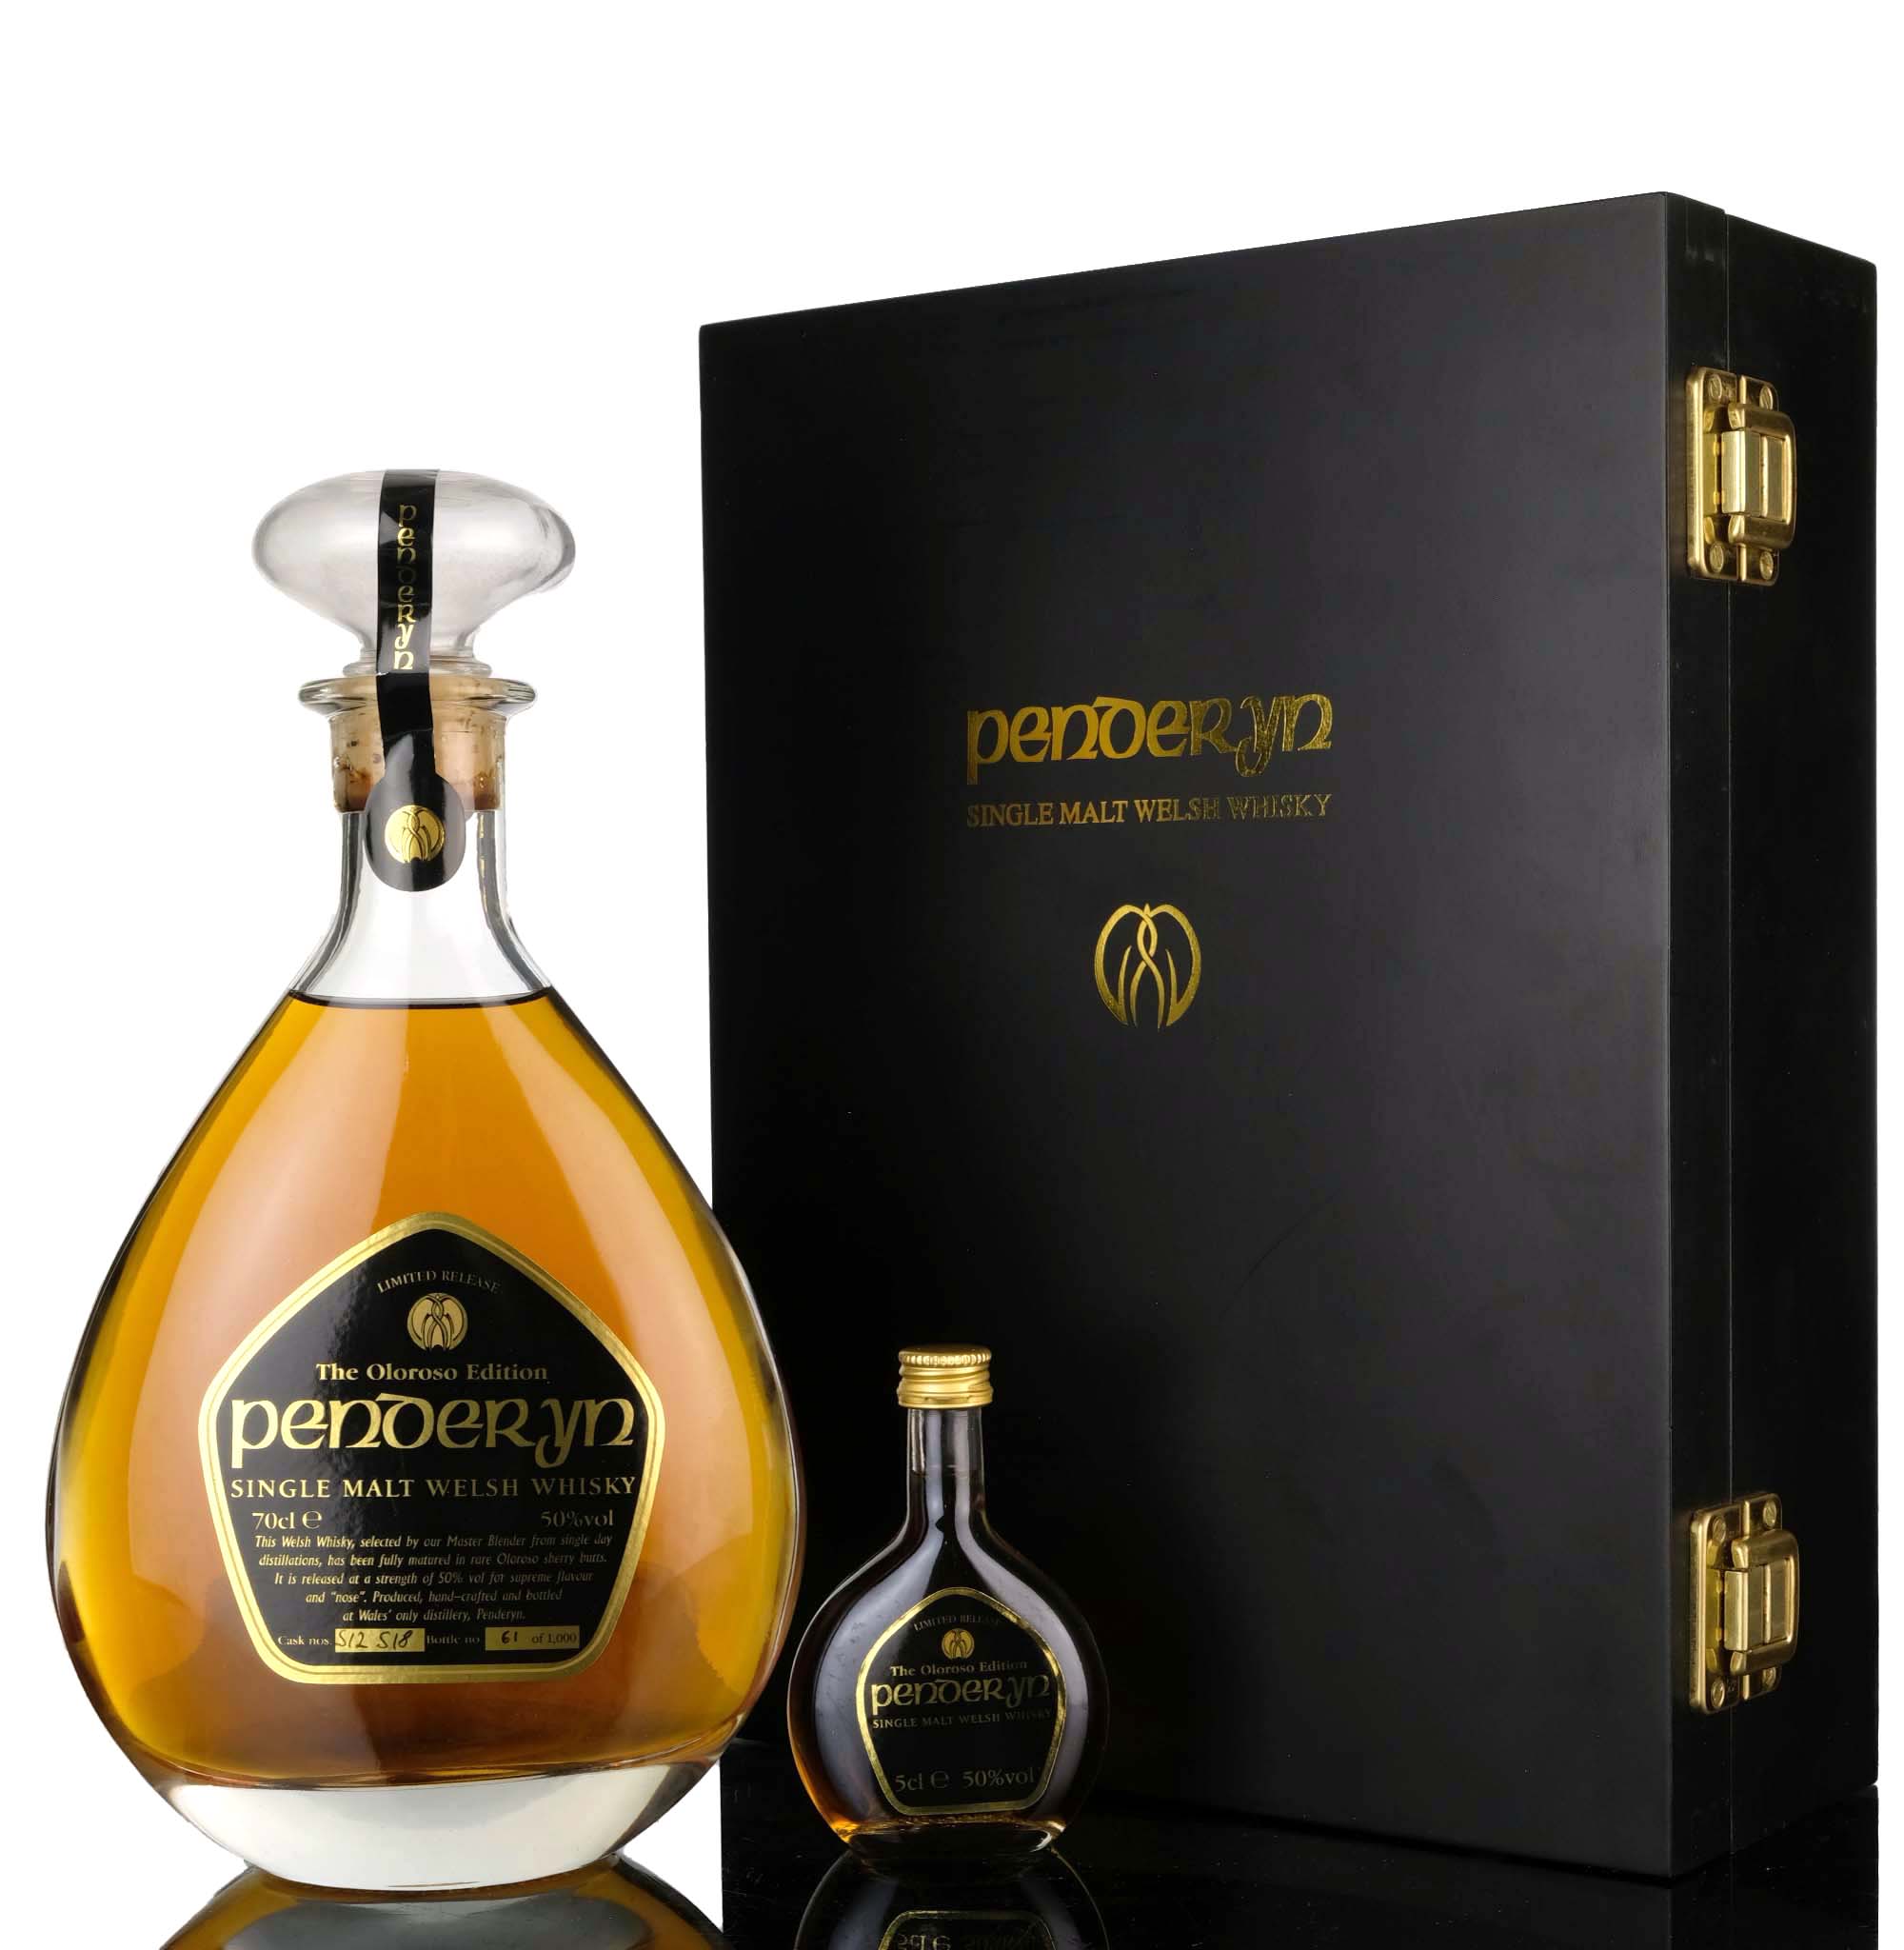 Penderyn Limited Release - The Oloroso Edition